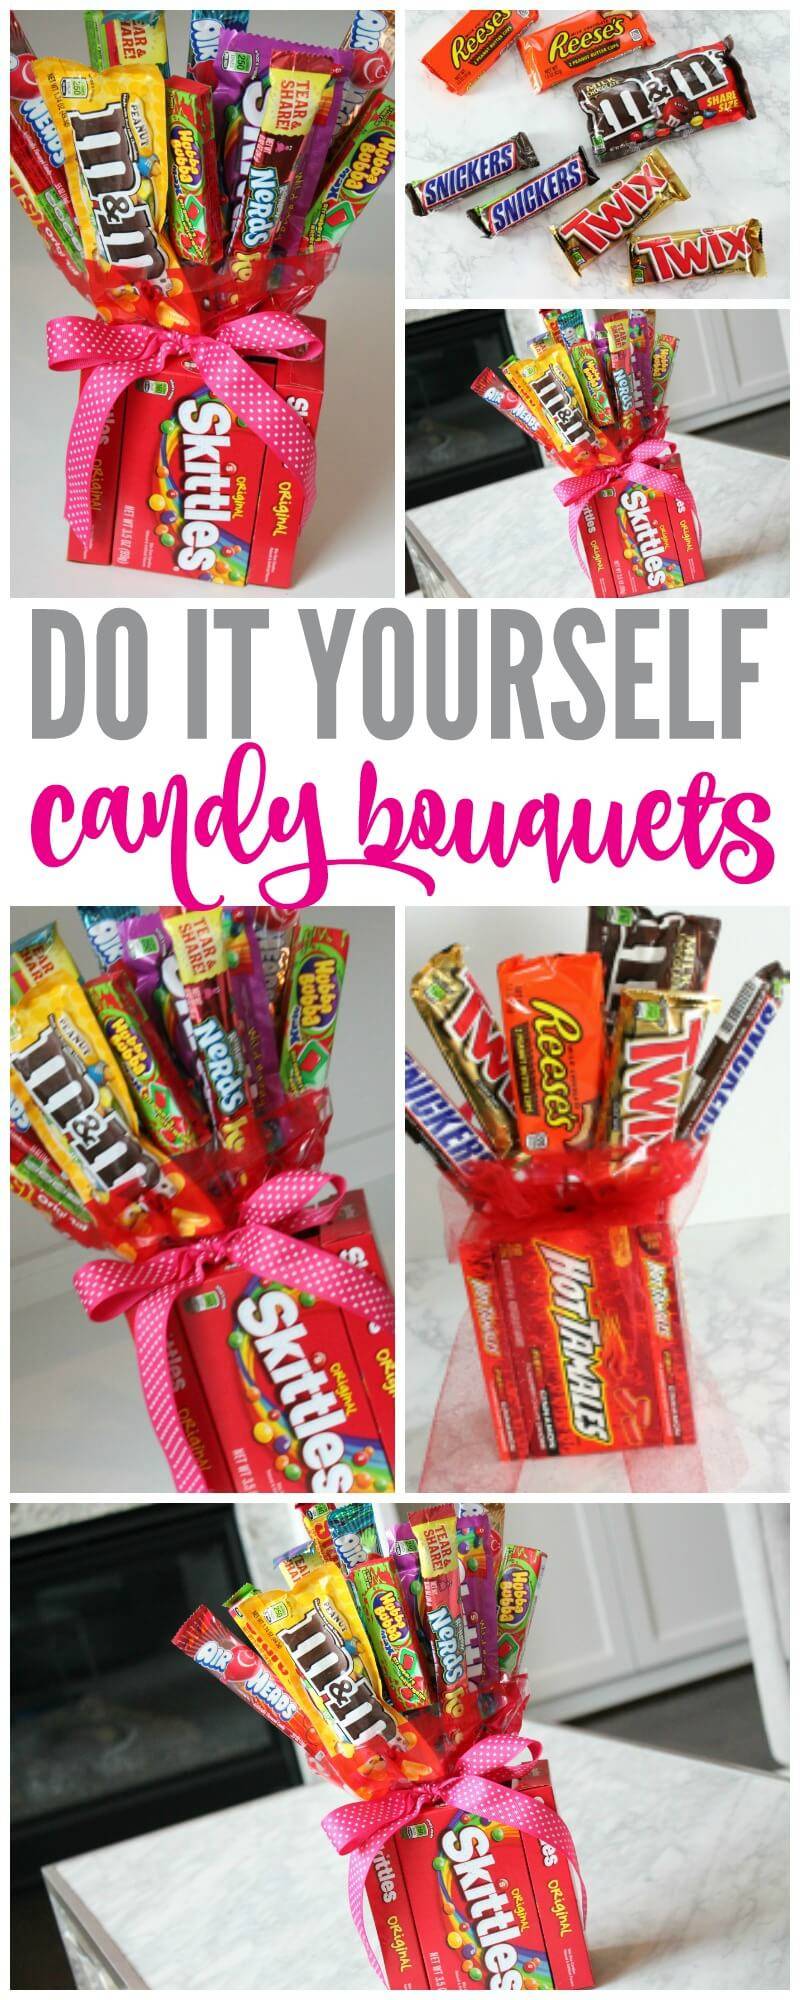 How to Put Together A DIY Candy Bouquet